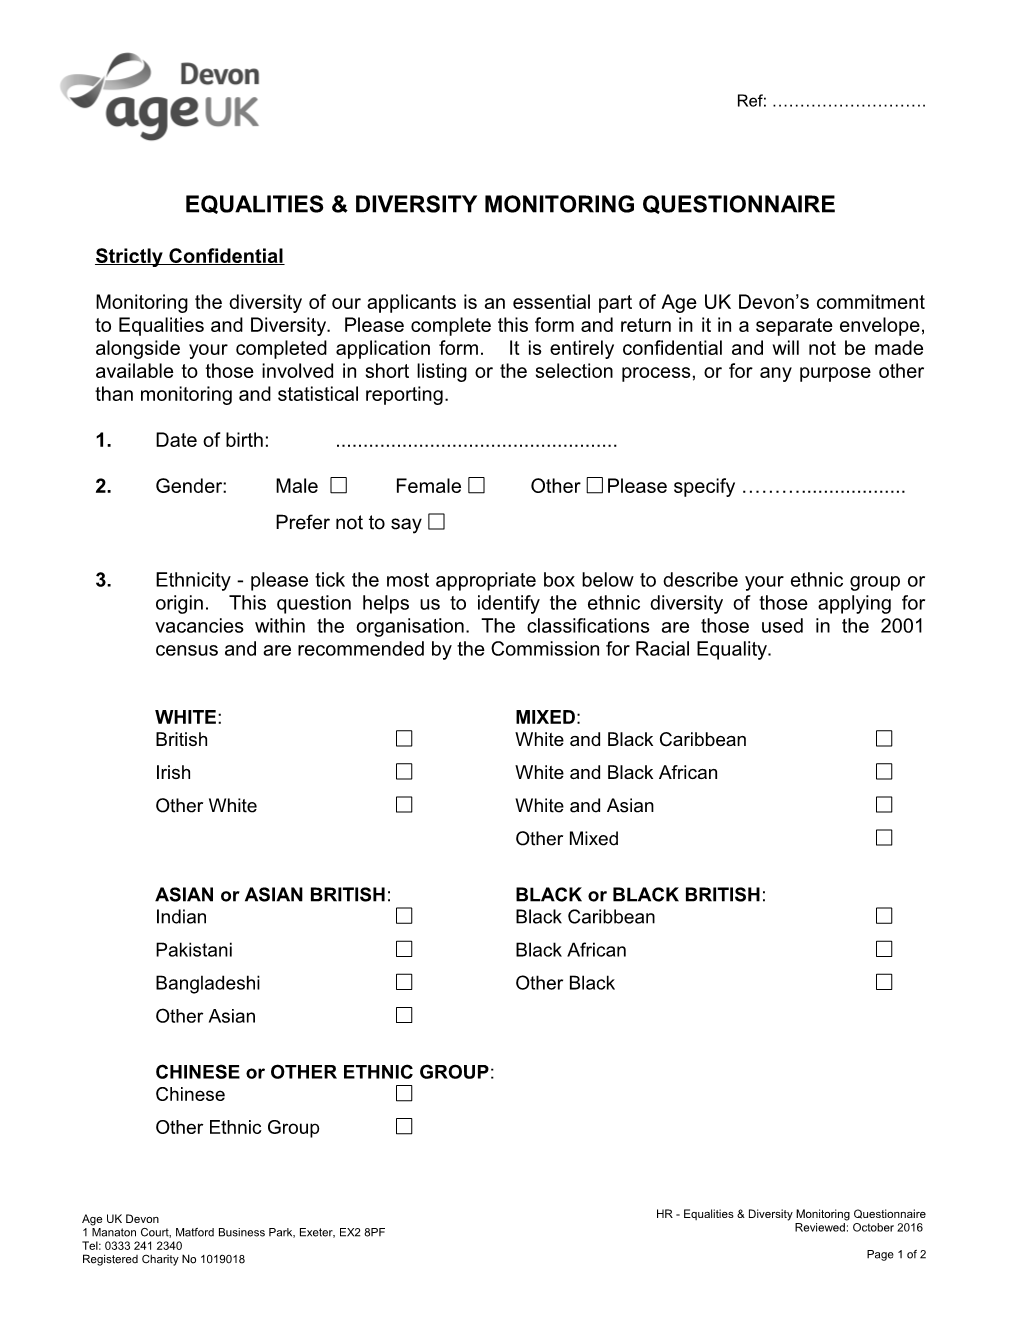 Equalities & Diversity Monitoring Questionnaire